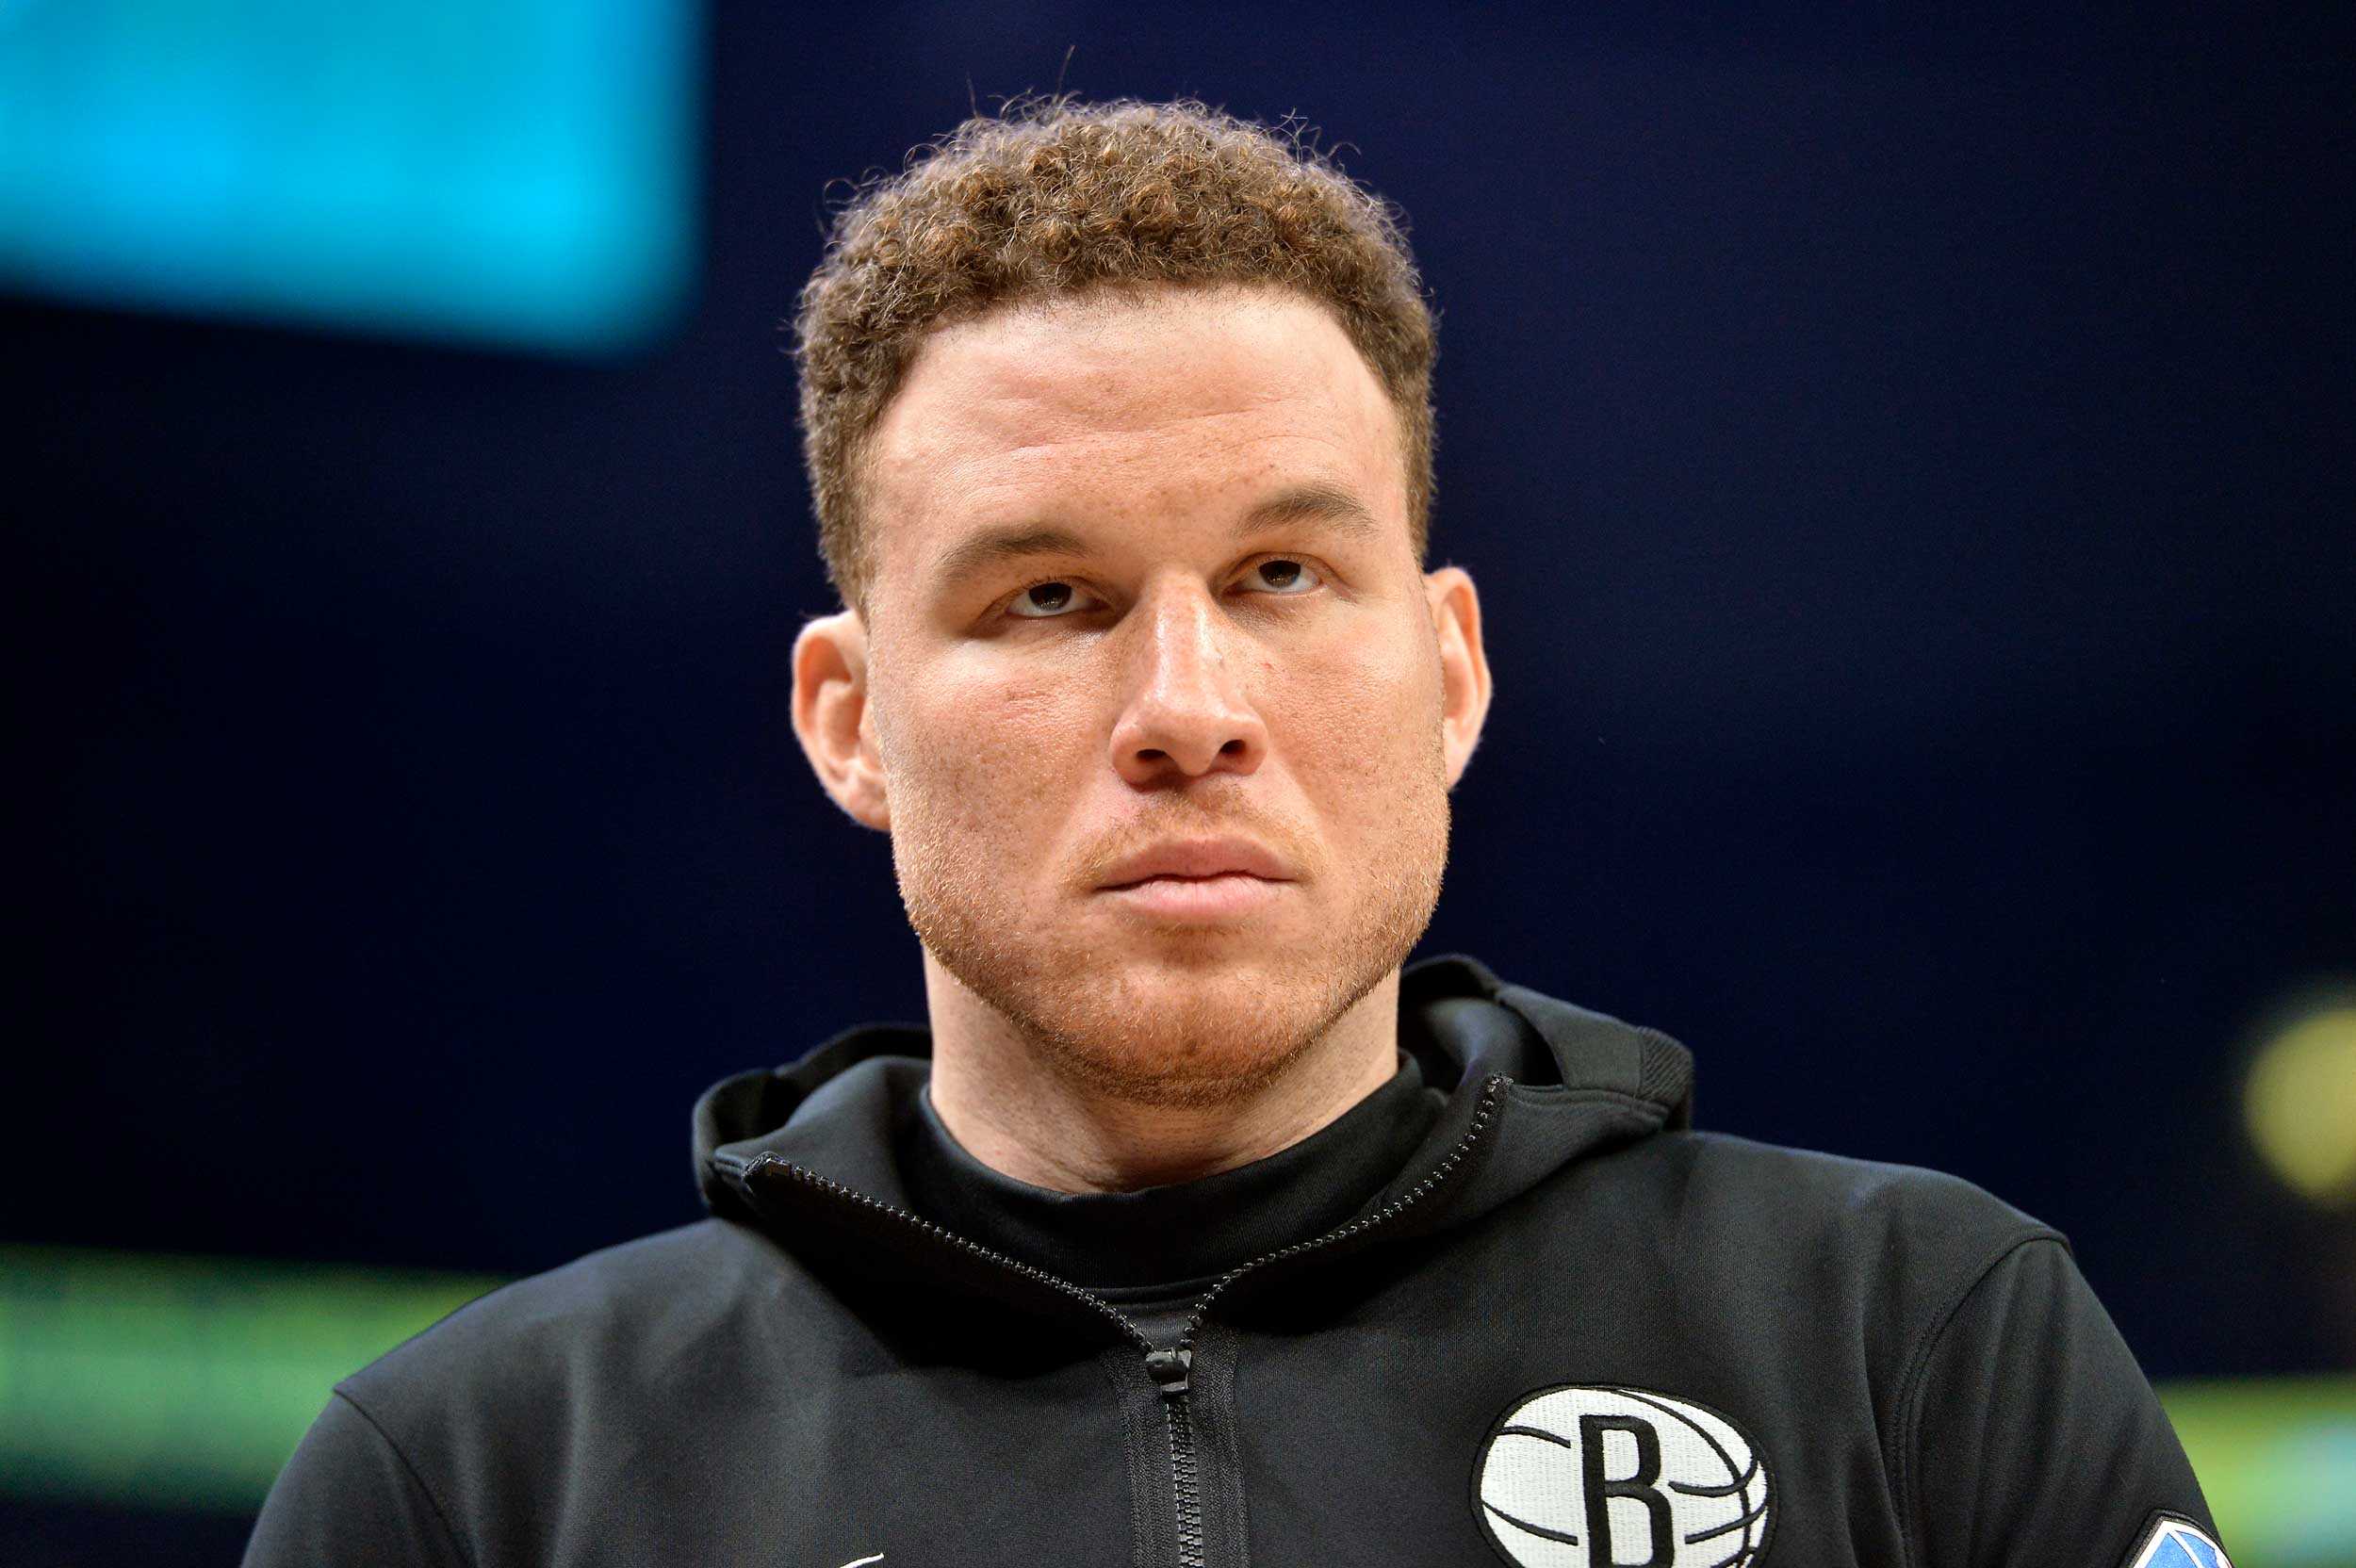 Blake Griffin joins Boston Celtics on one-year deal, ESPN reports